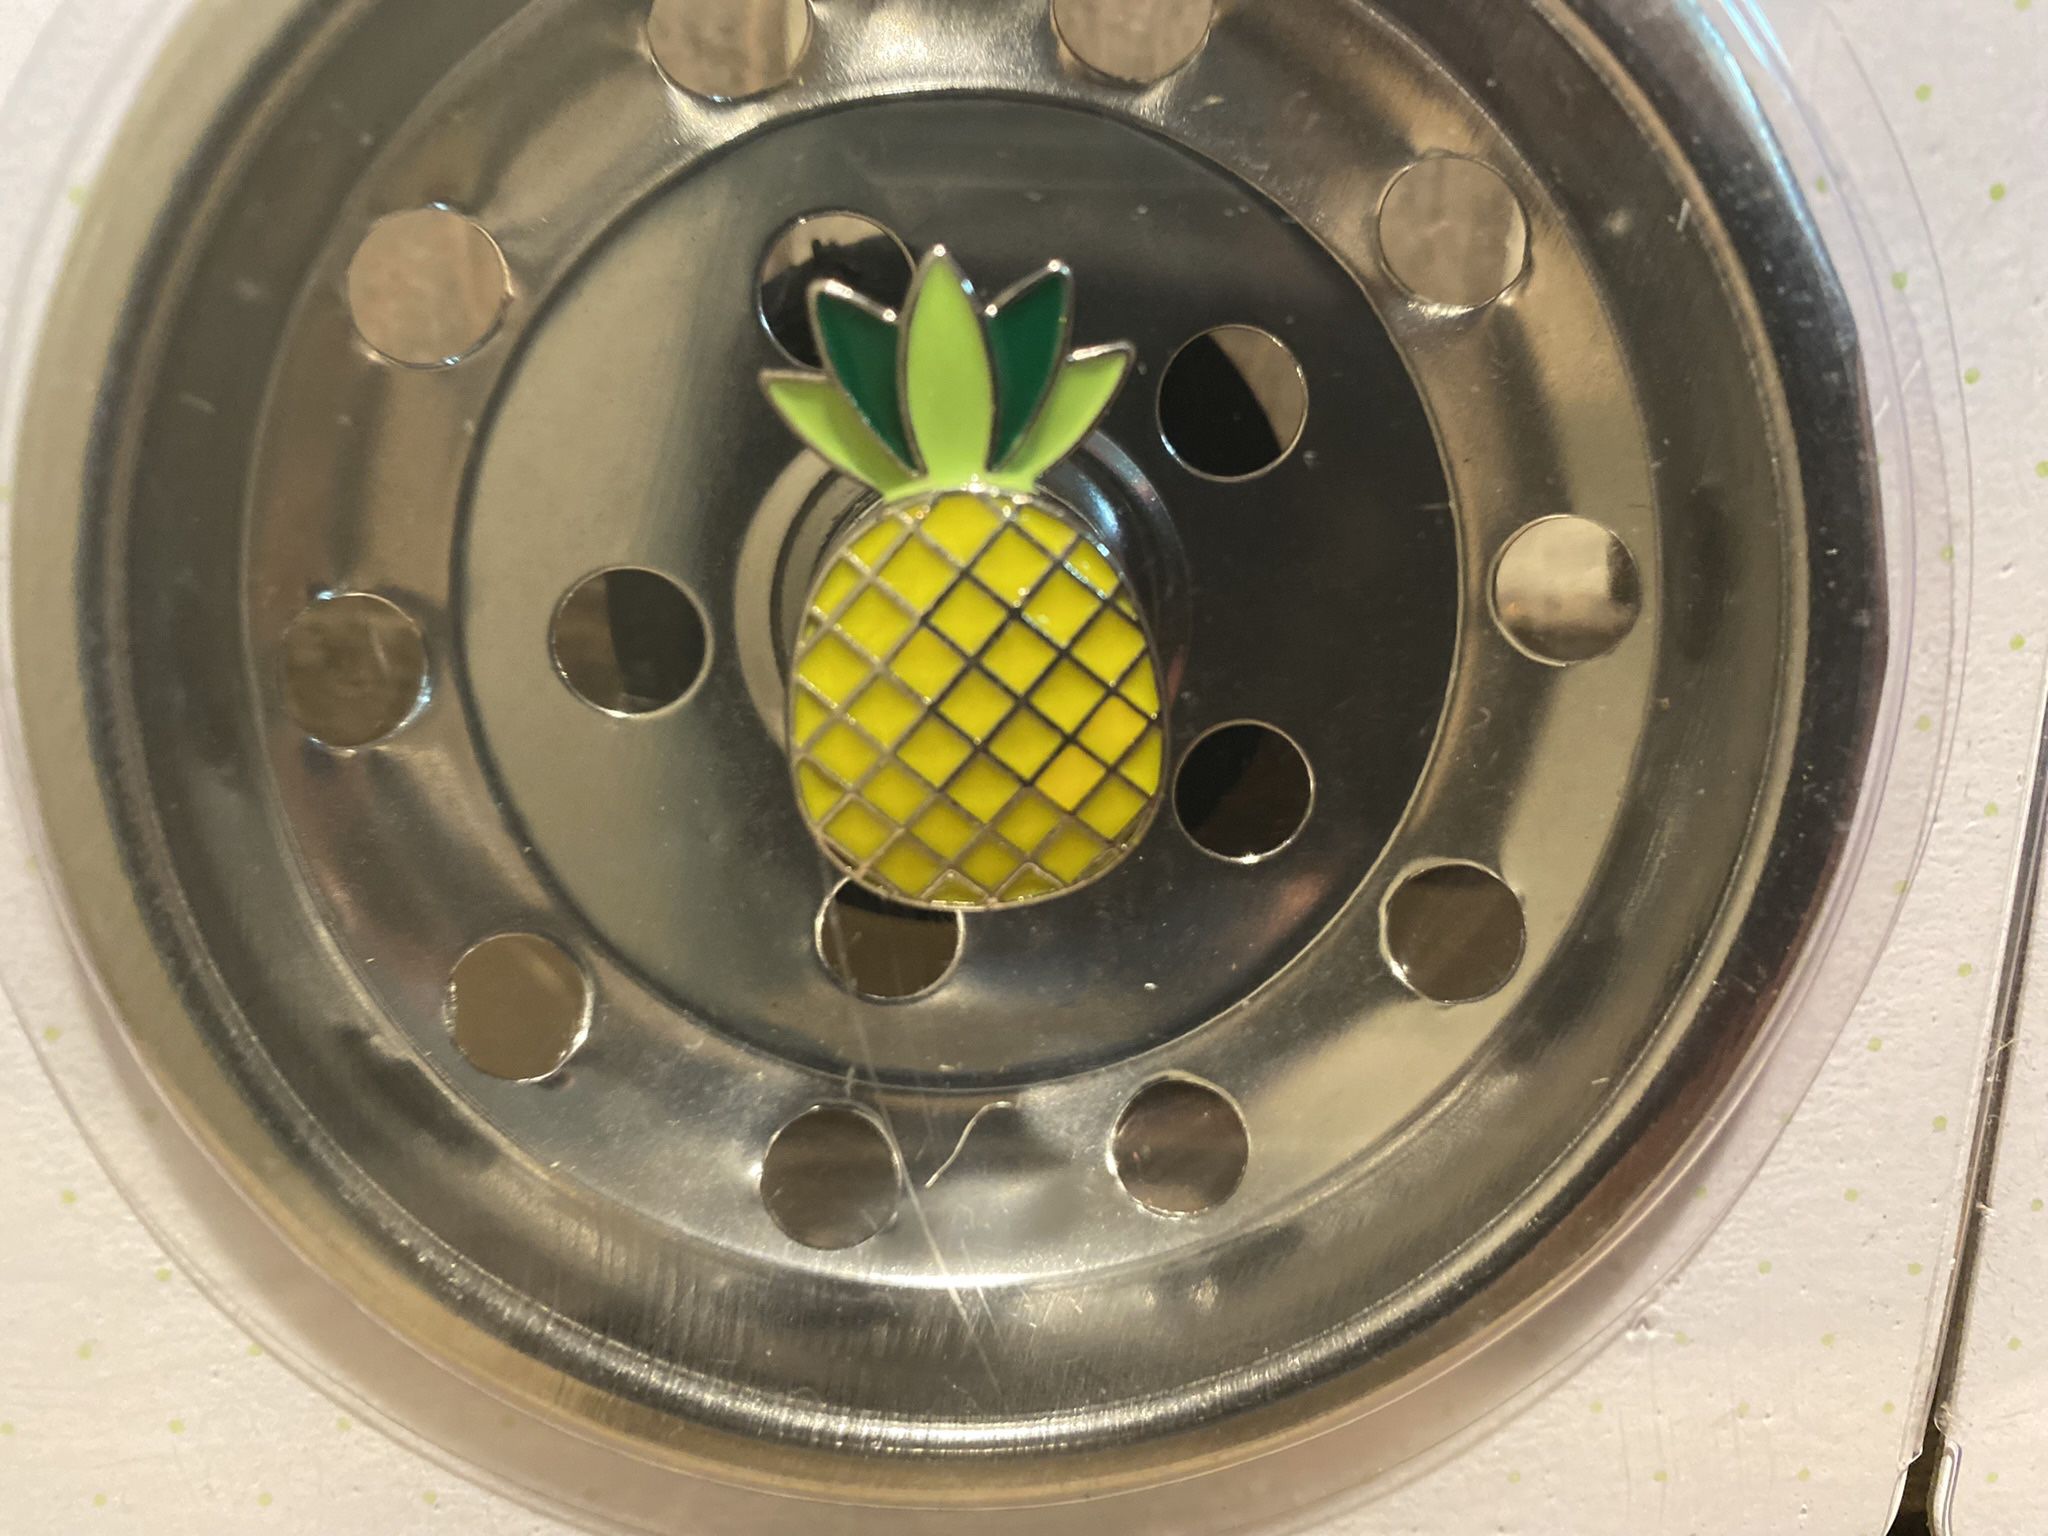 Pineapple Sink Strainers & Pineapple Stoppers Set of 2, Sink Strainer & Stopper